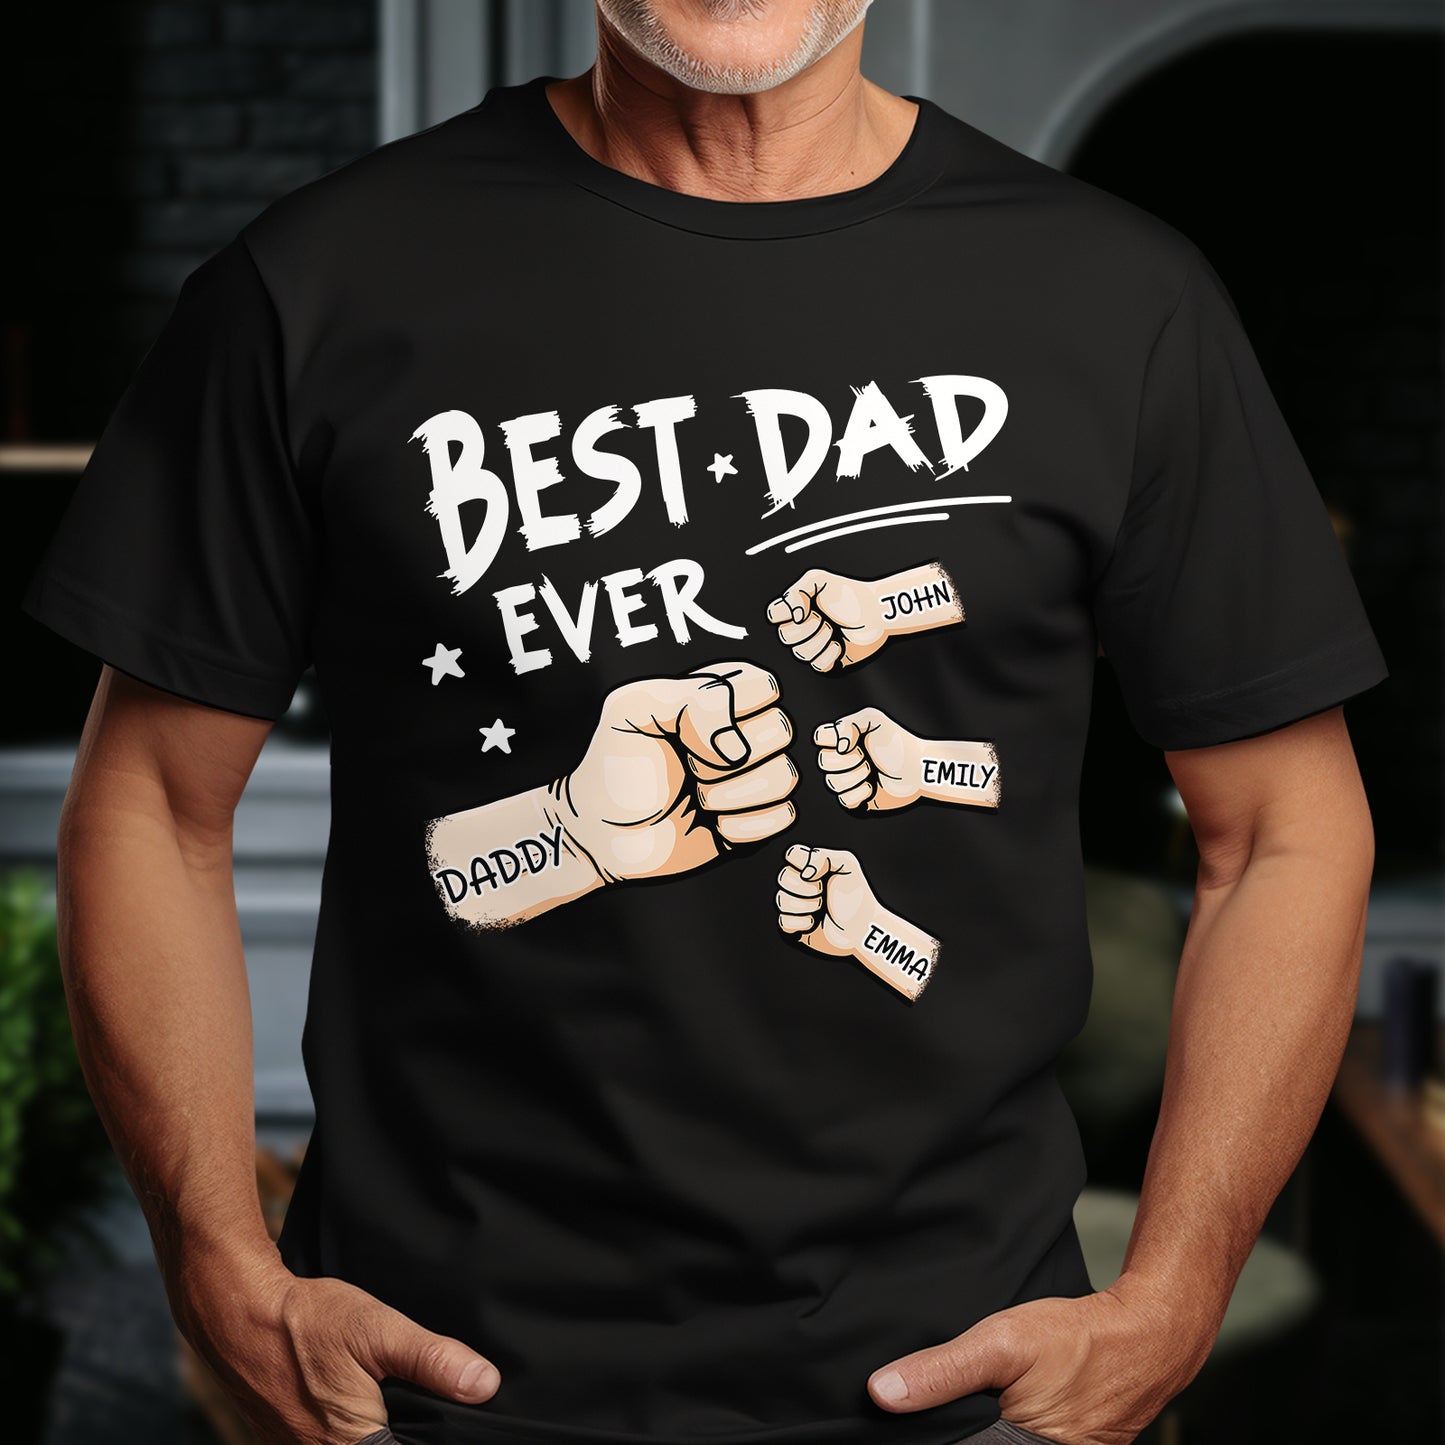 Father - The Best Dad Ever - Personalized Shirt (Ver 2)